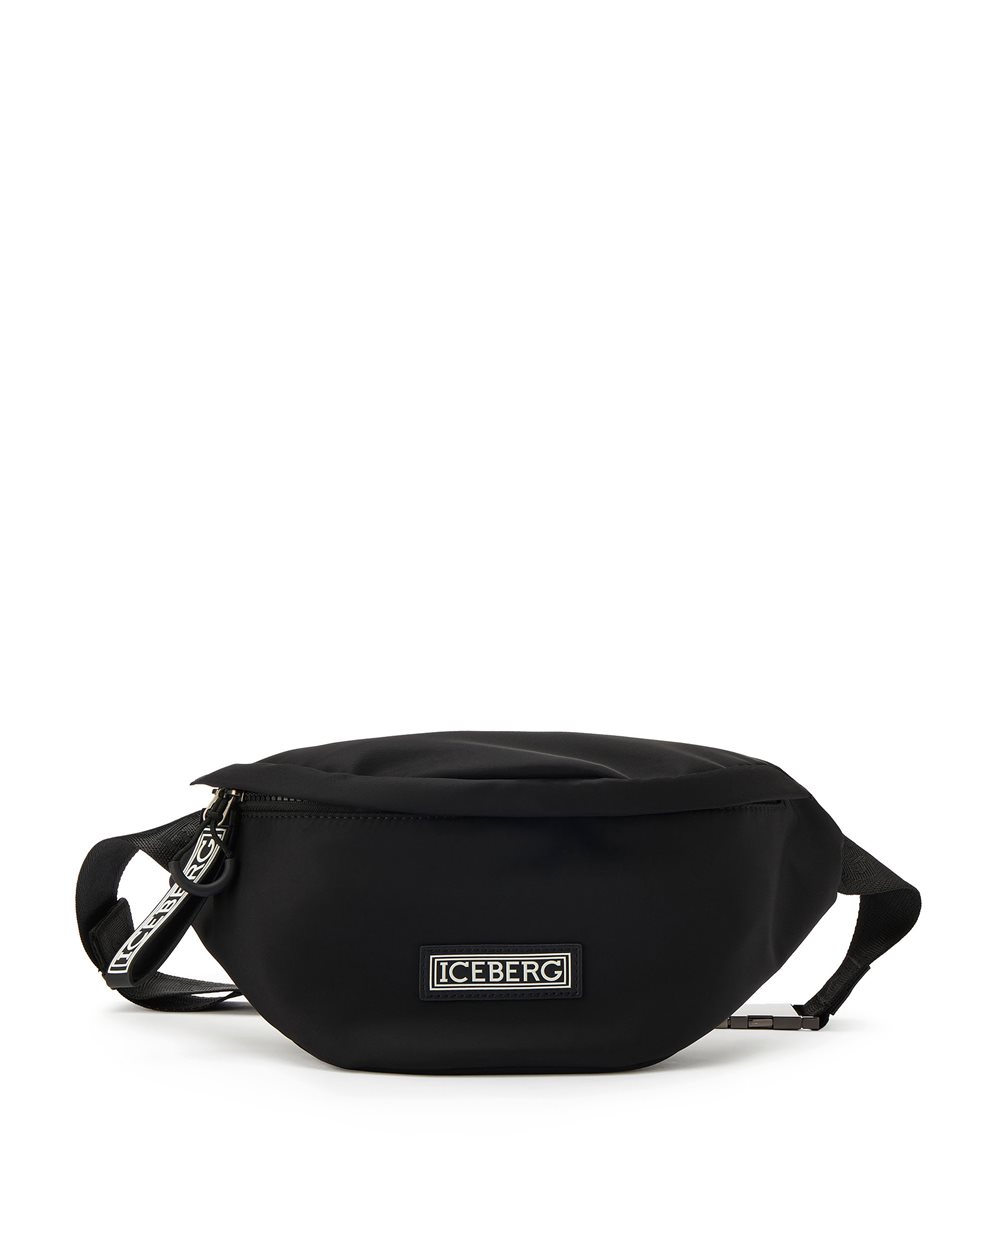 Nylon pouch with logo -  ( SECONDO STEP US ) PROMO UP TO 40% | Iceberg - Official Website